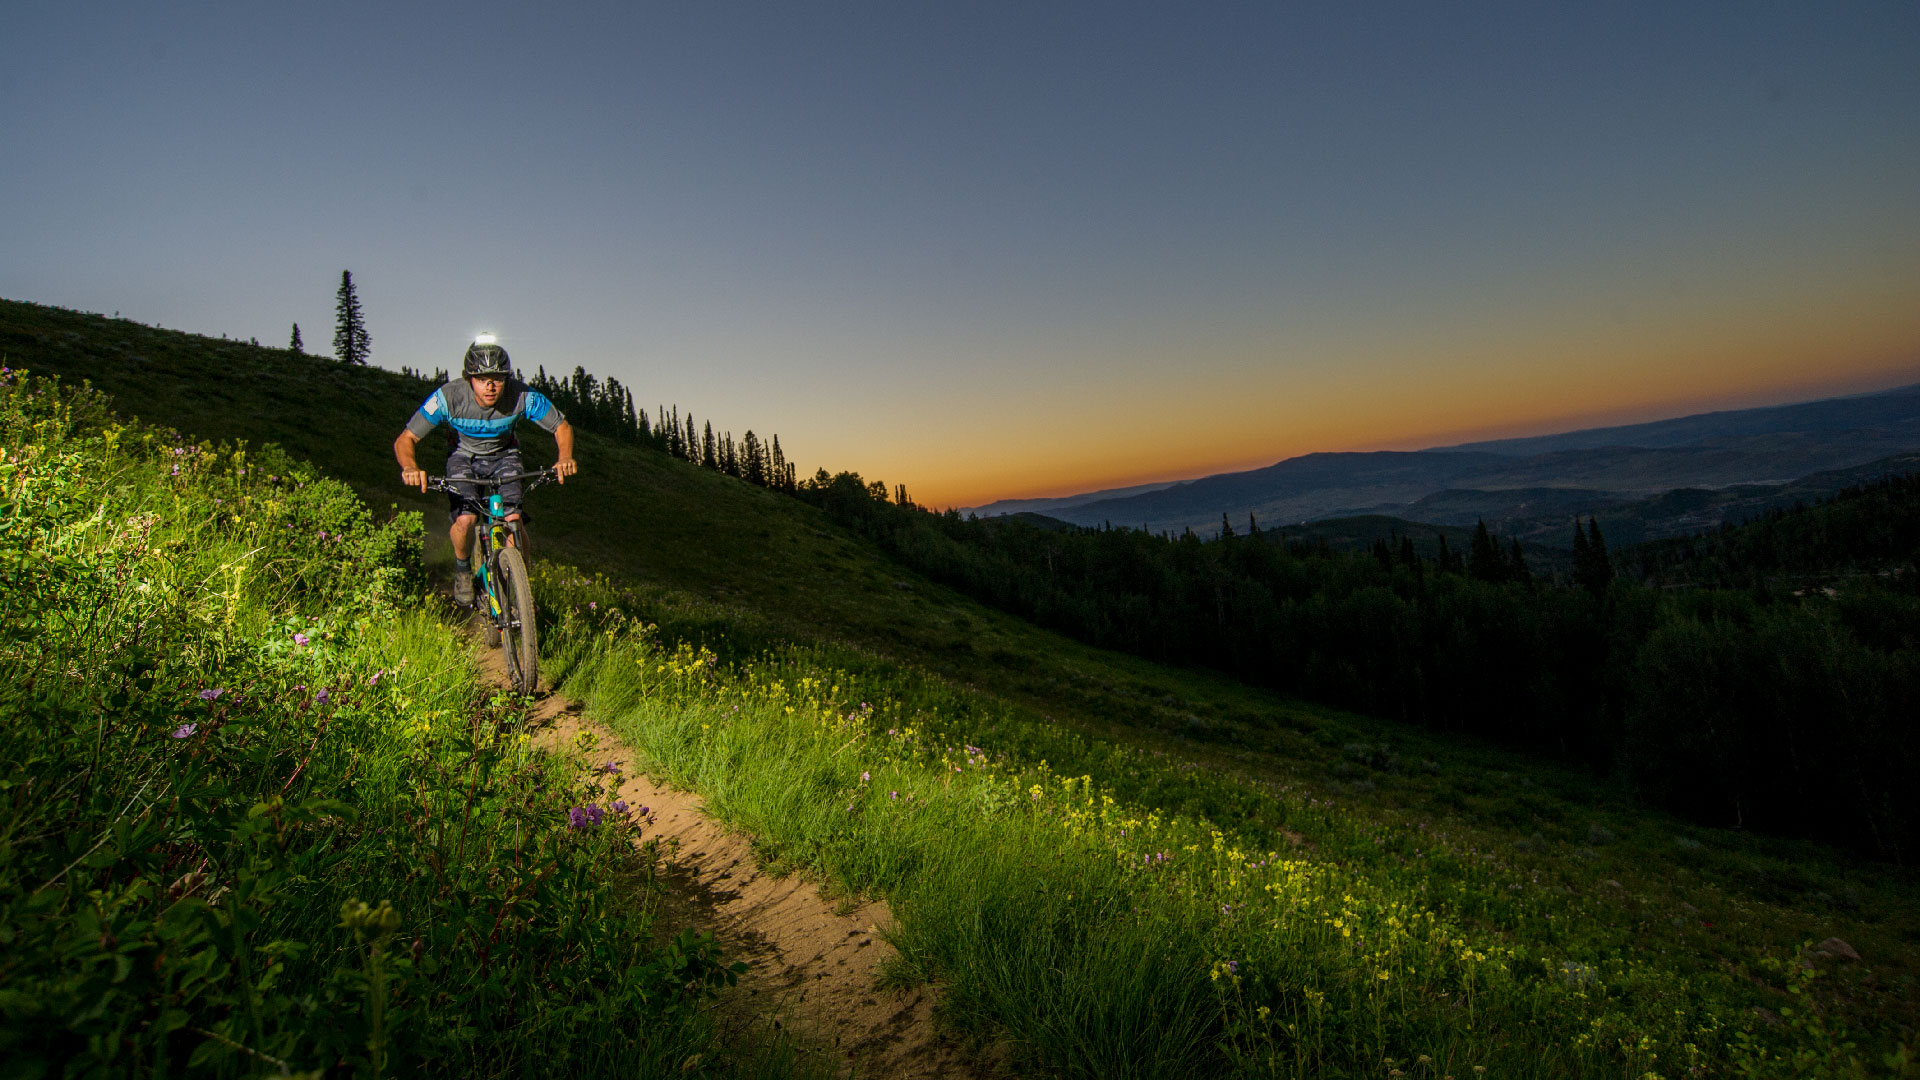 Guided Night Riding Mountain Bike Tour from White Pine Touring in Park City, UT.